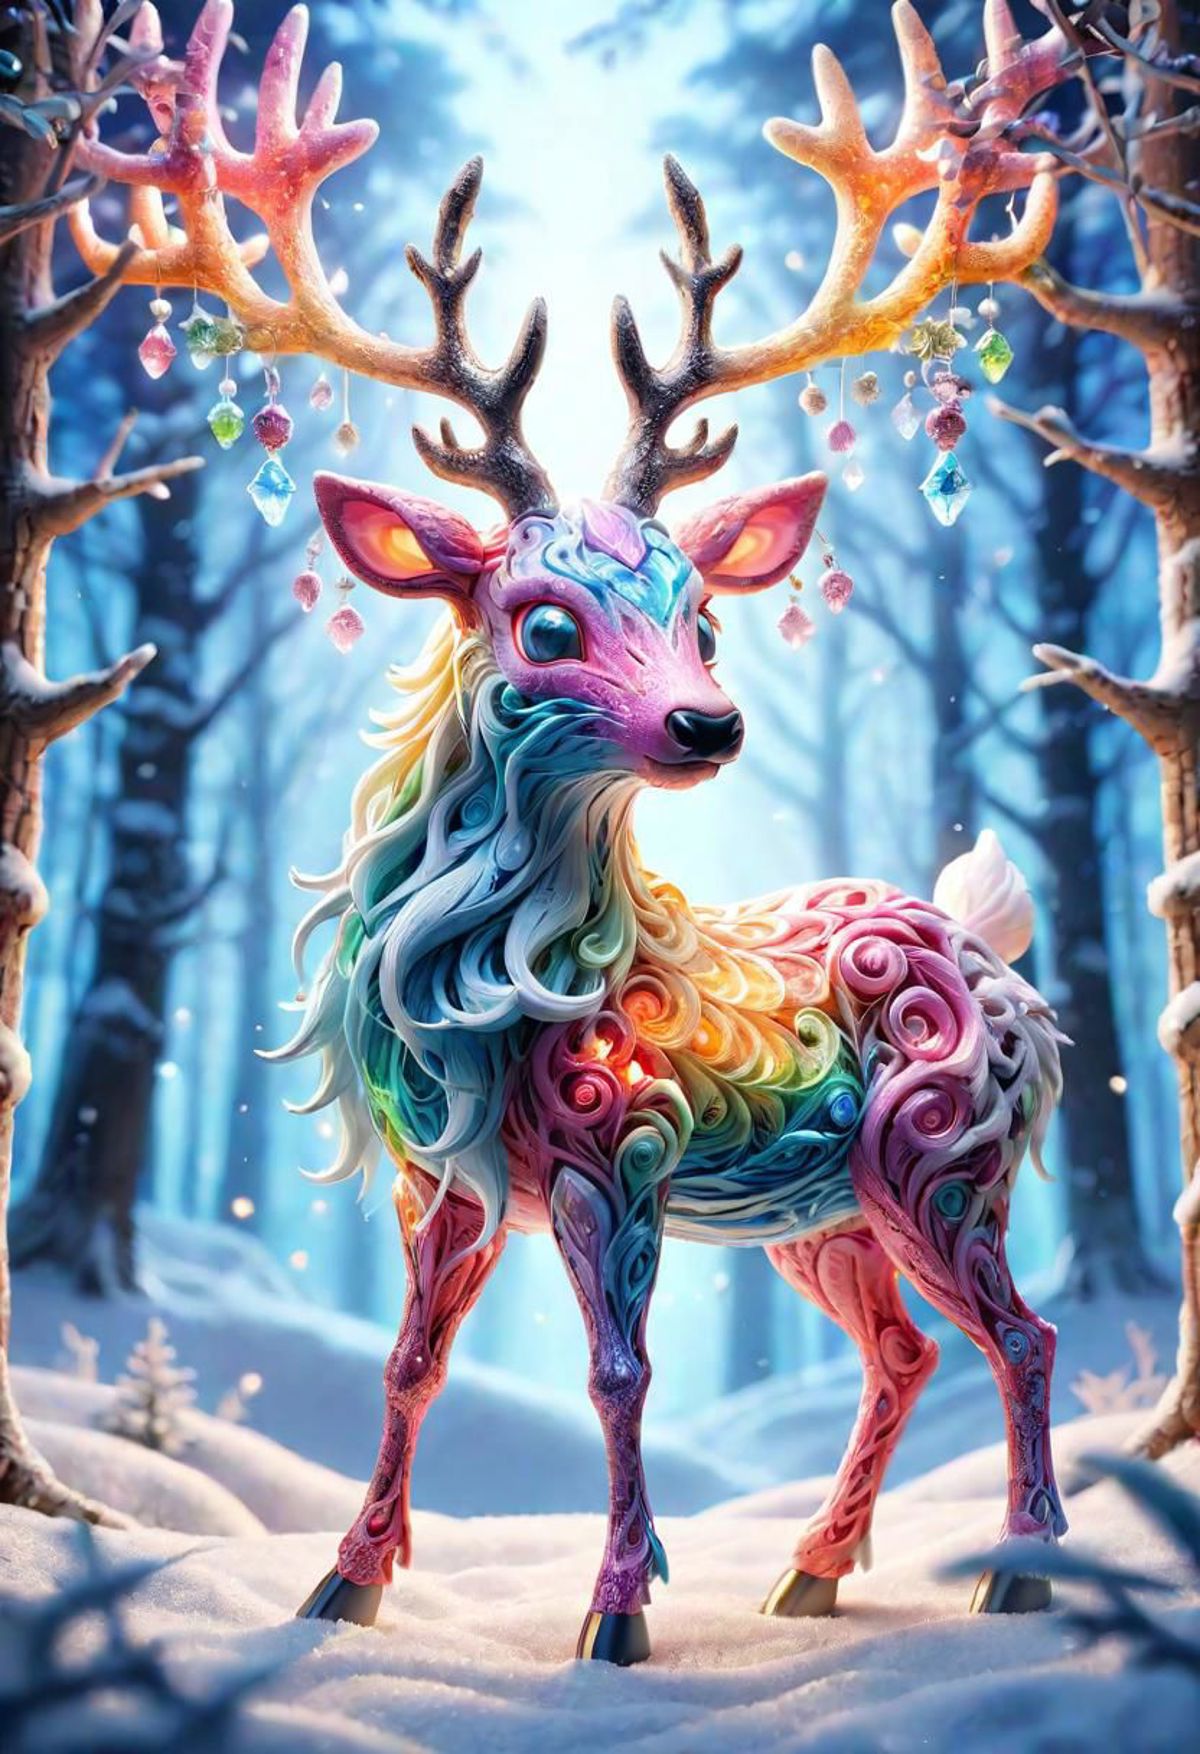 A multicolored deer with a blue face standing in the snow.